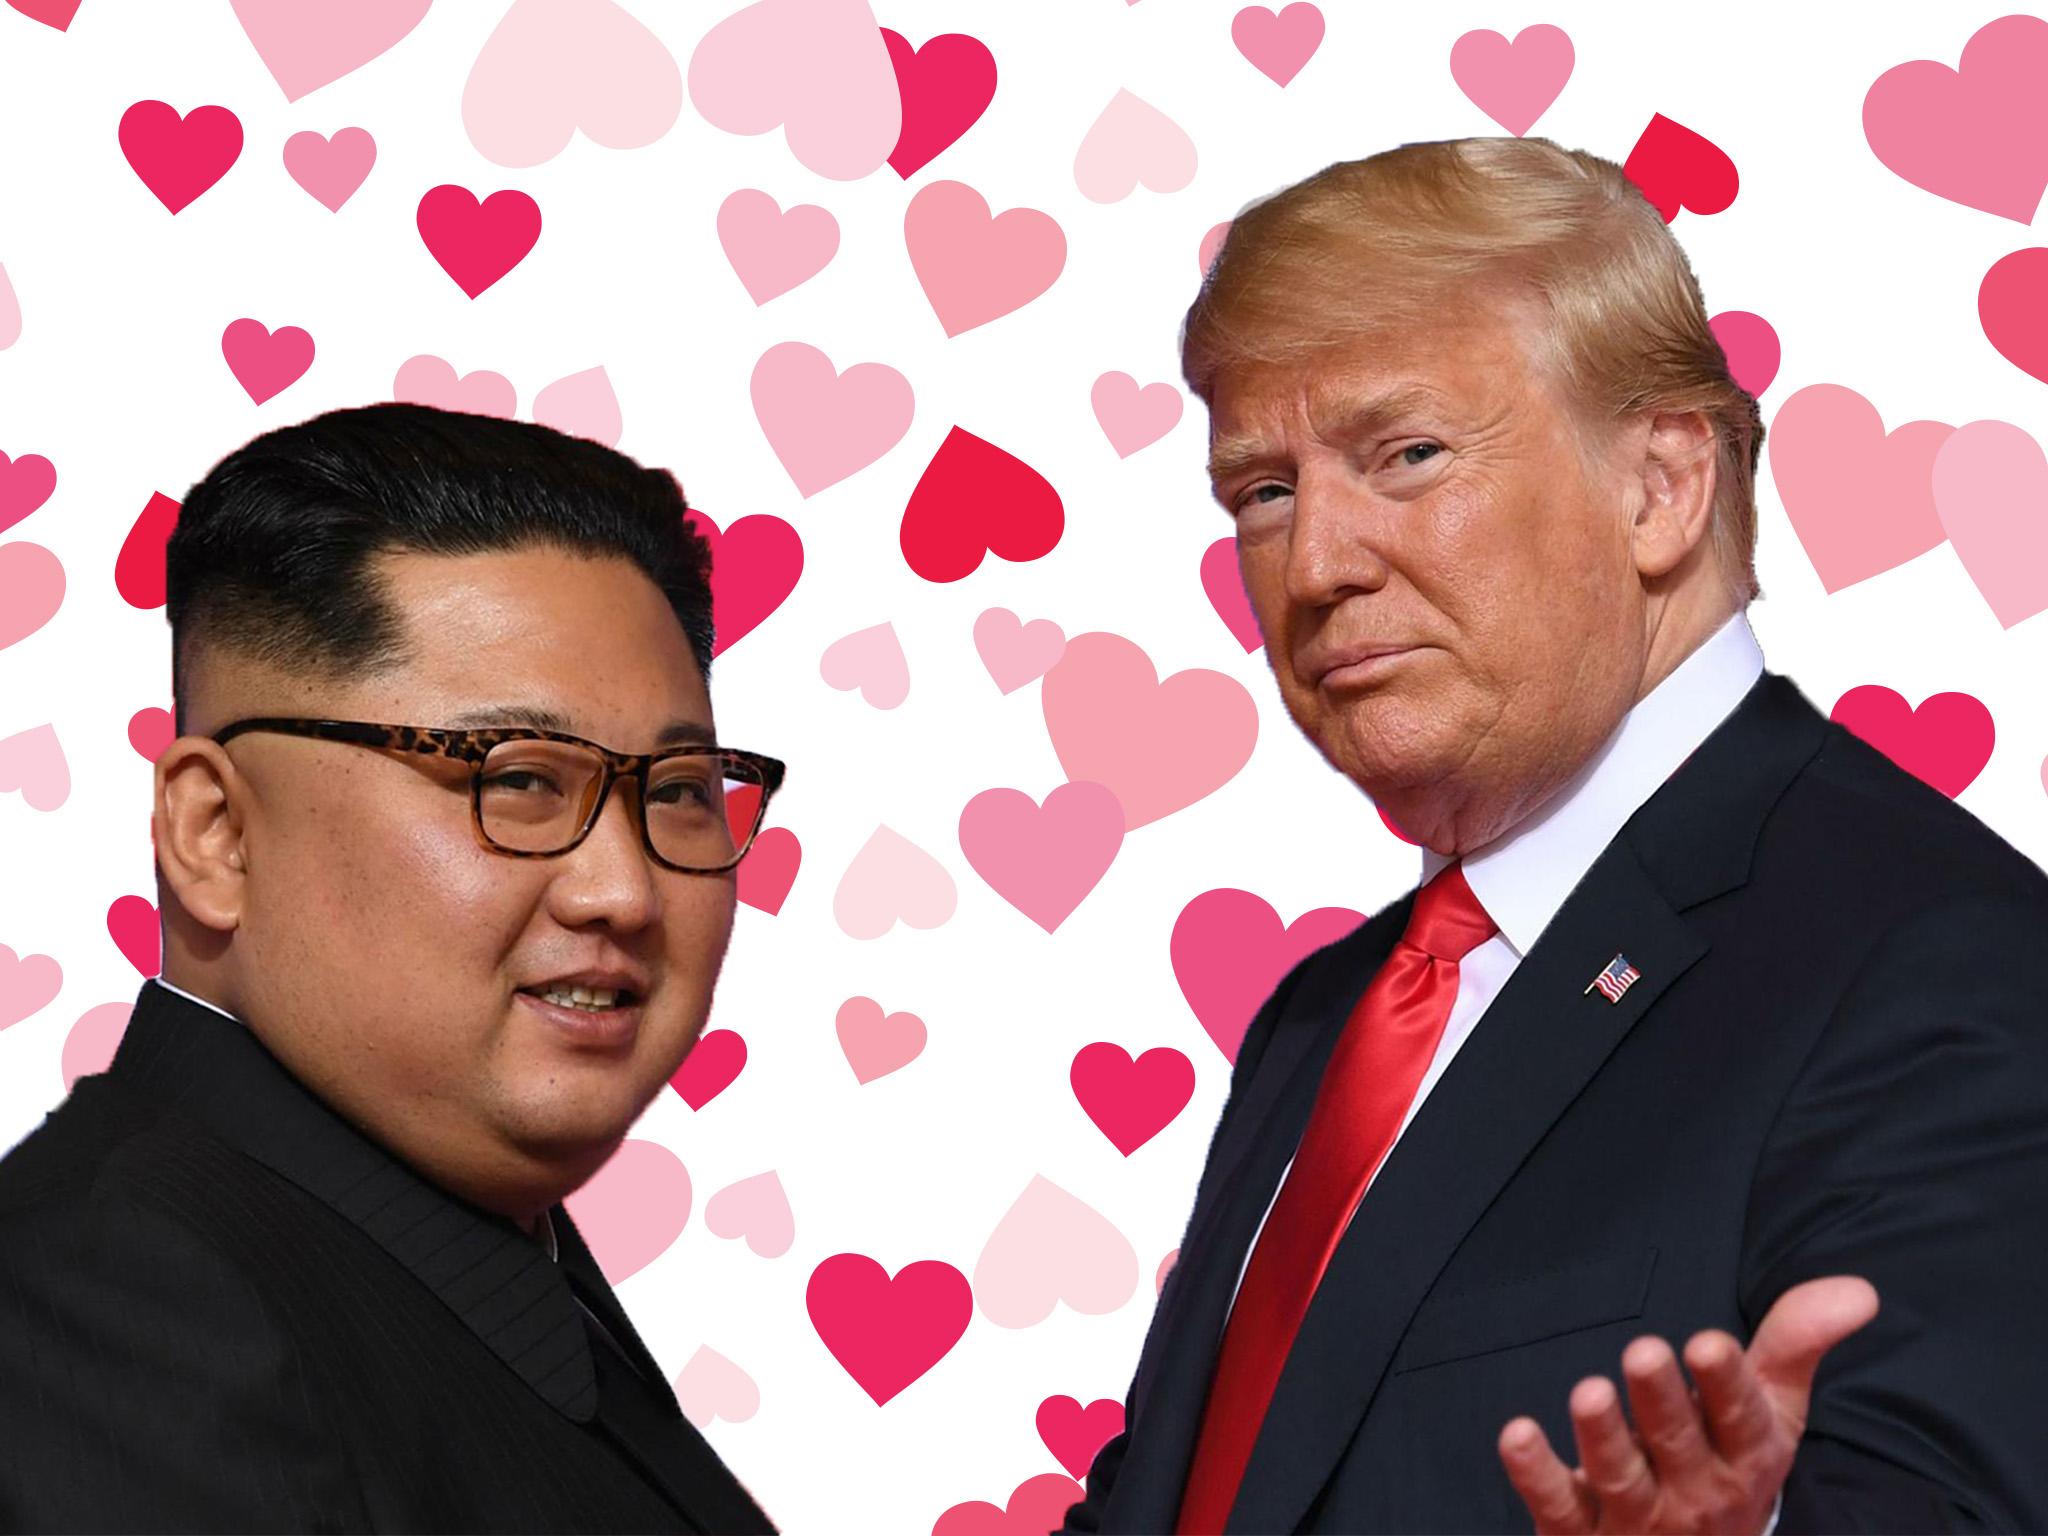 After a rocky start, love appears to have blossomed between the US president and North Korea's Kim Jong-un